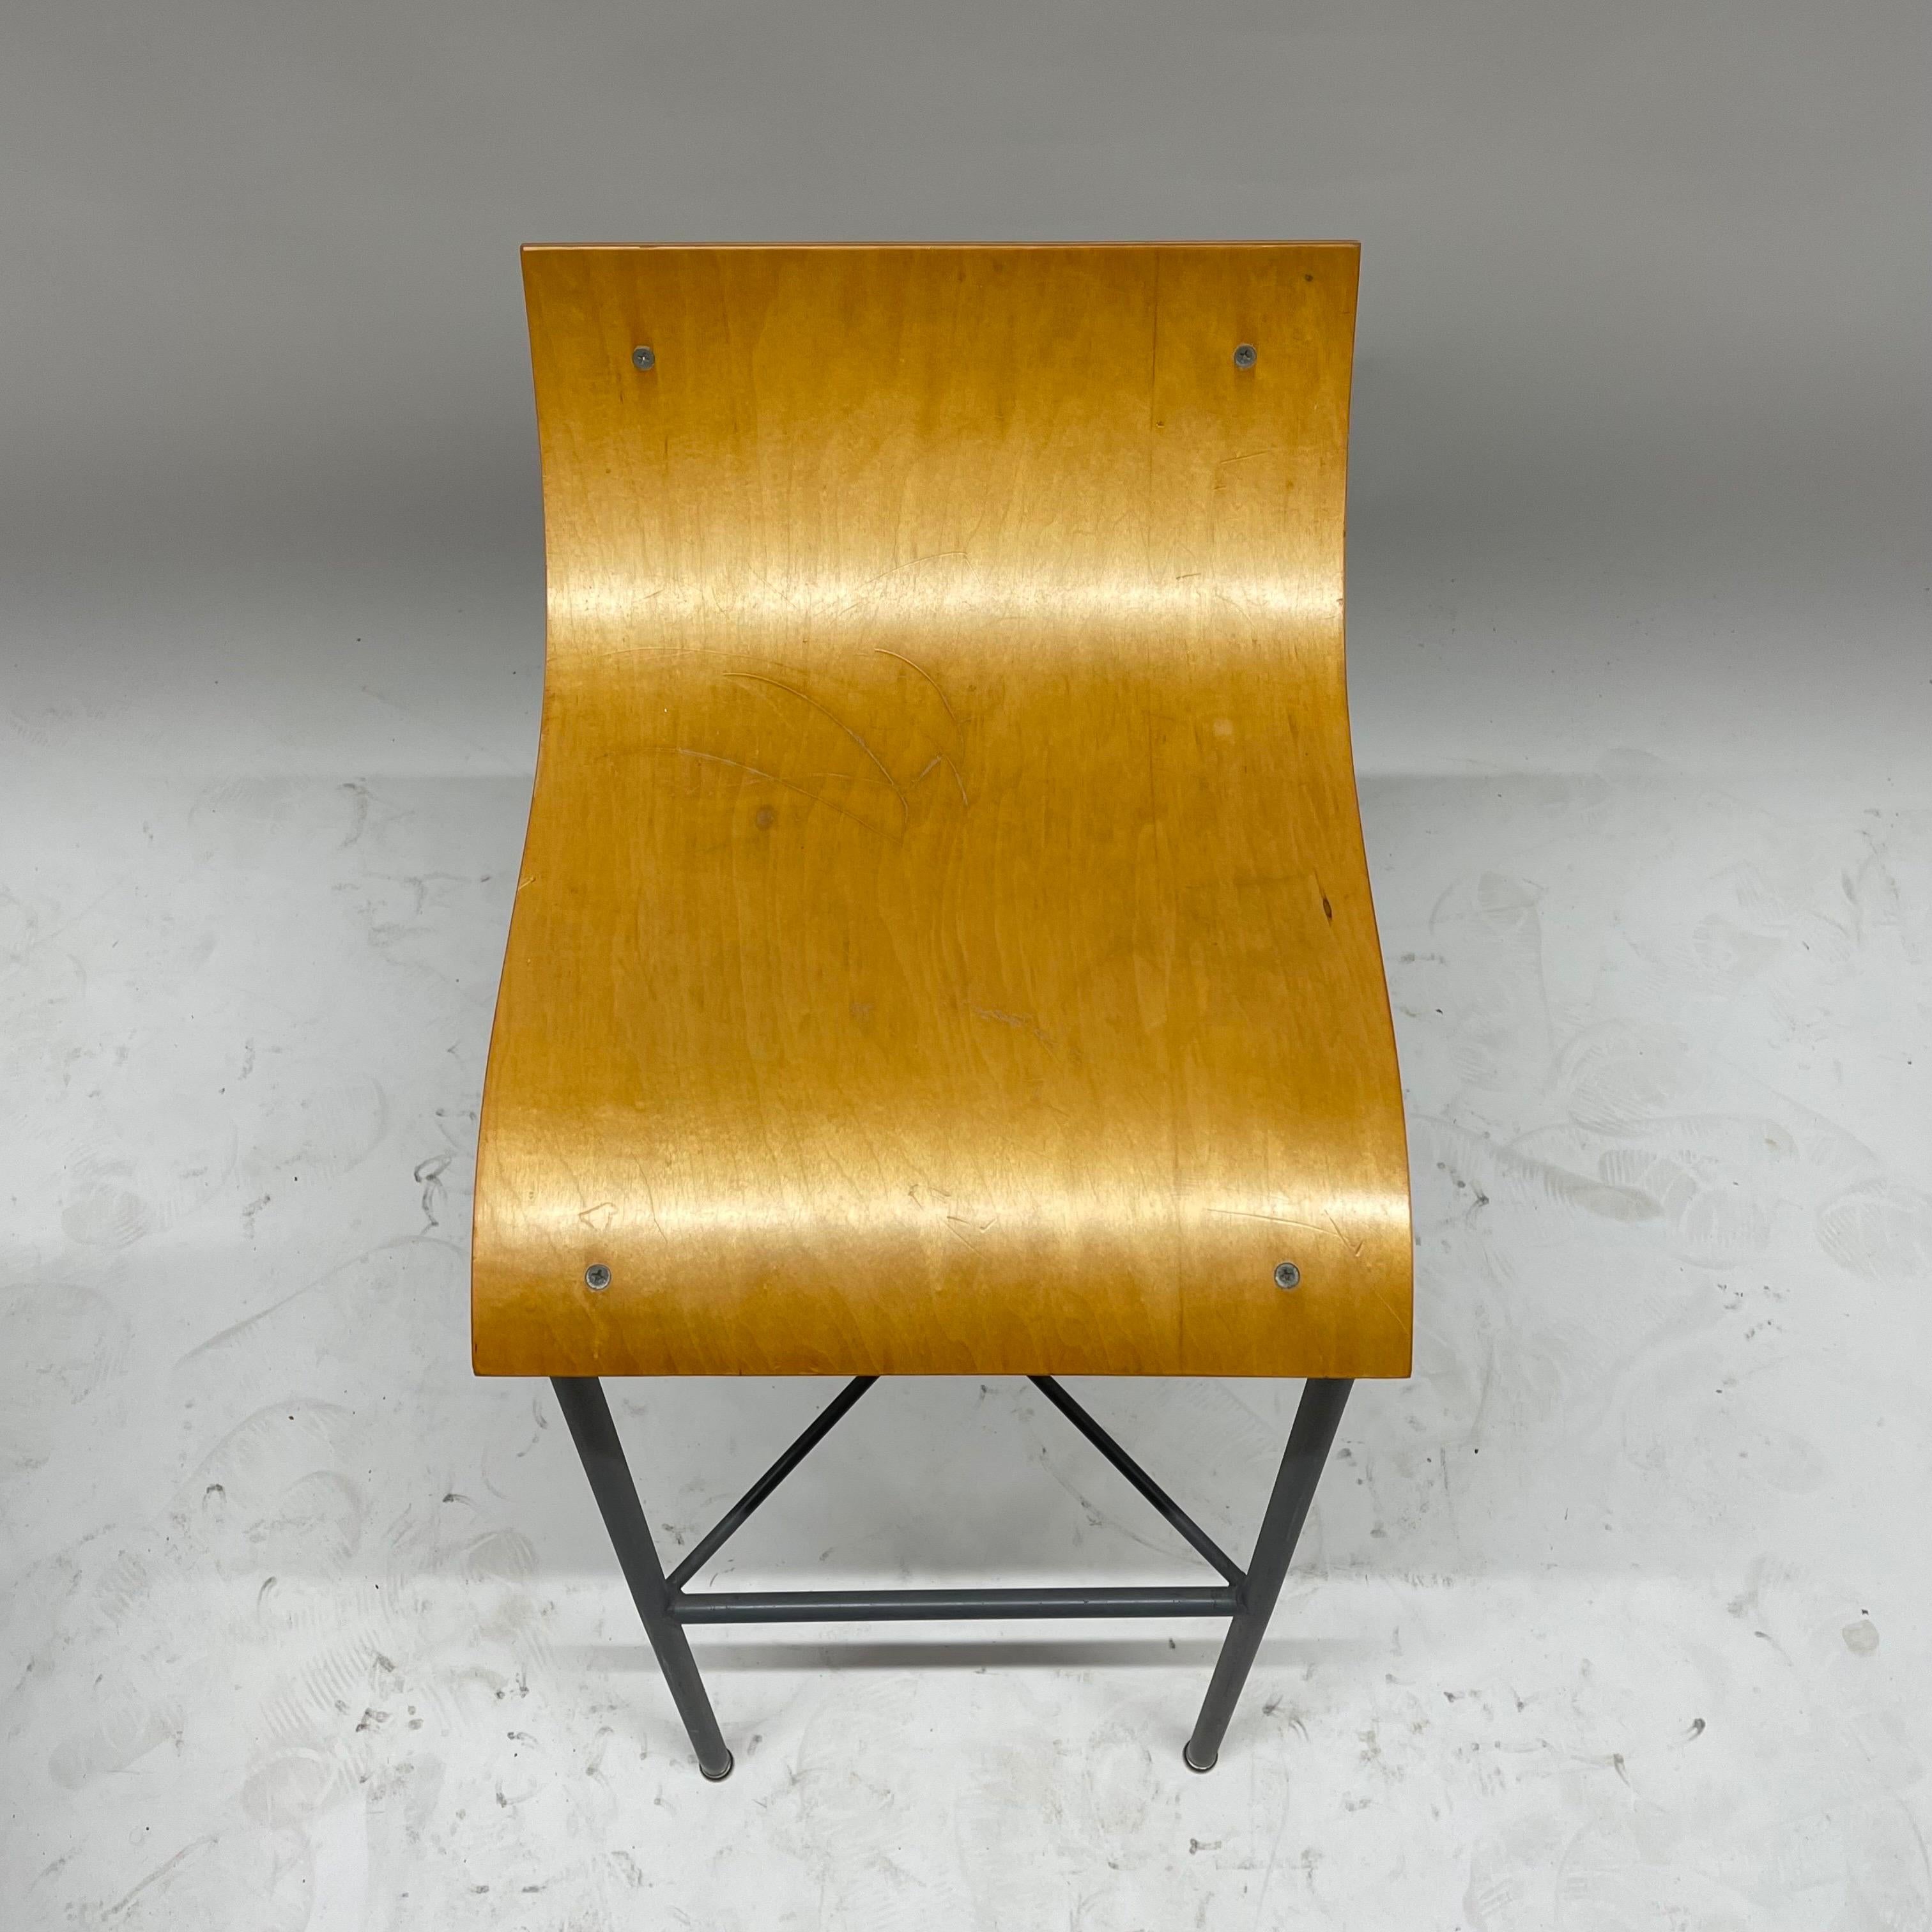 Pair of Post Modern Sculptural Steel and Bent Plywood Bar Stools, circa 1980s For Sale 1